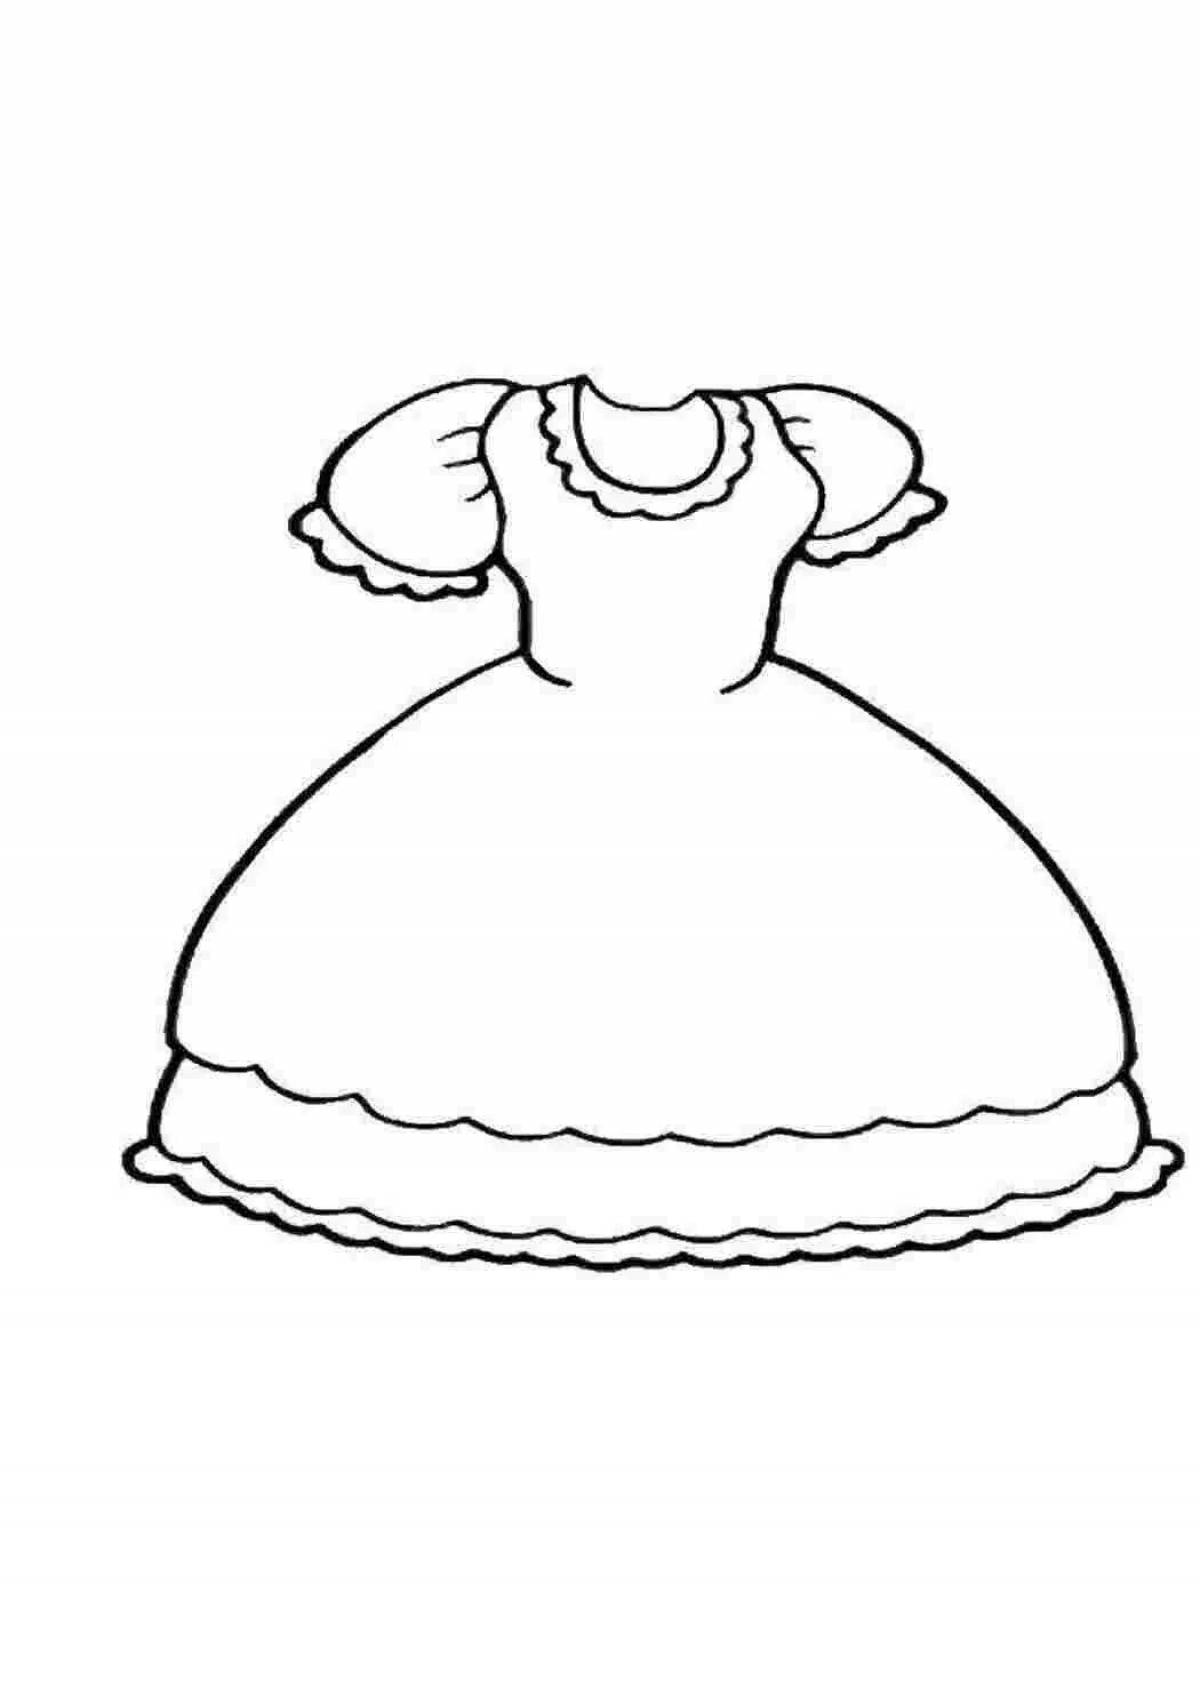 Shining dress coloring book for 5-6 year olds